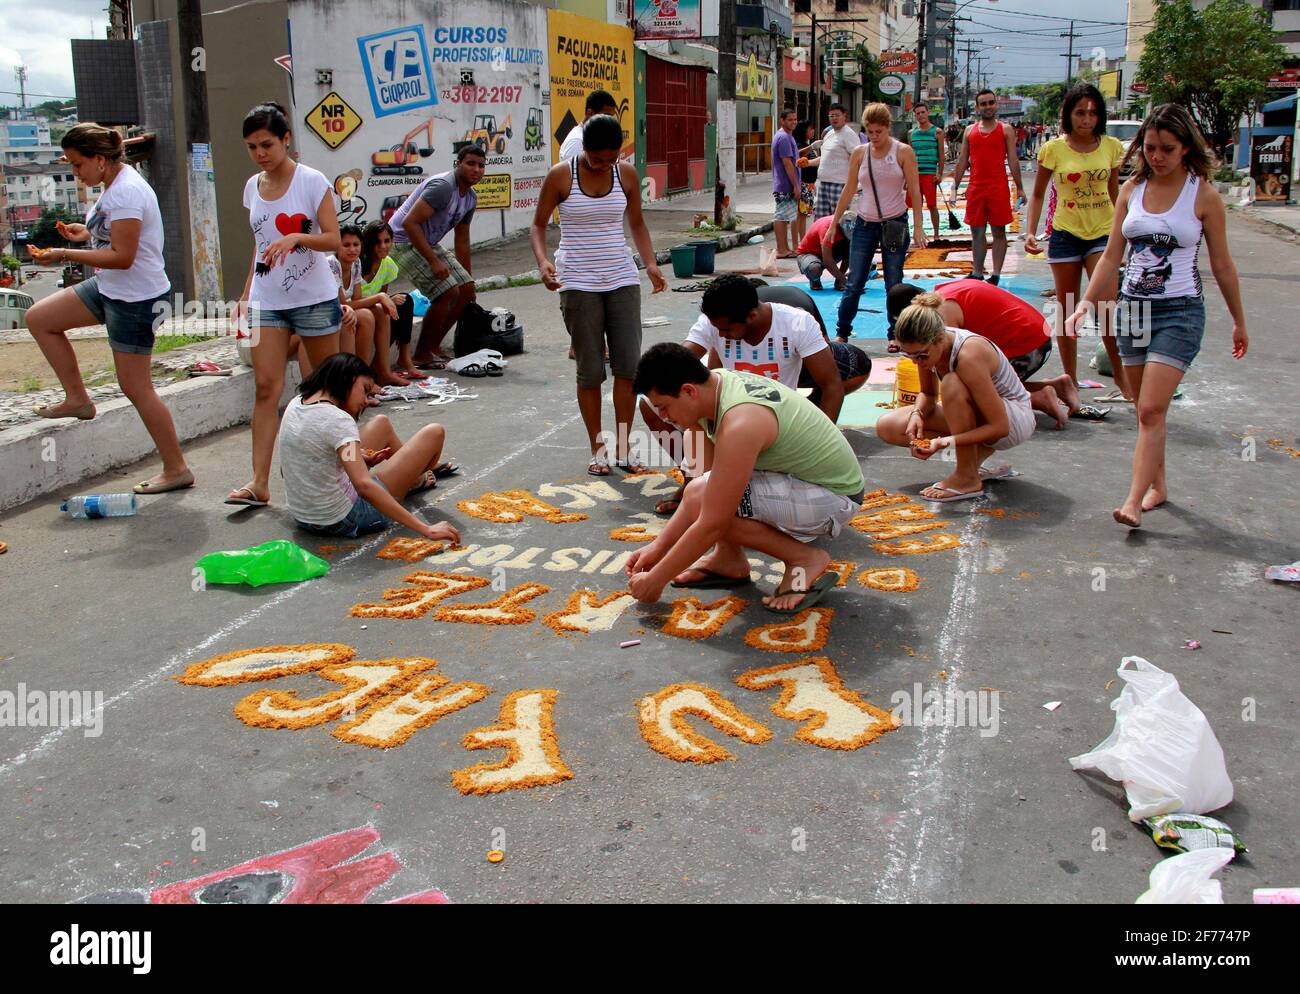 Itabuna, Bahia / Brazil - June 7, 2012: People are seen making traditional tapes during the Corpus Crist holiday festivities in Itabuna. *** Local Cap Stock Photo